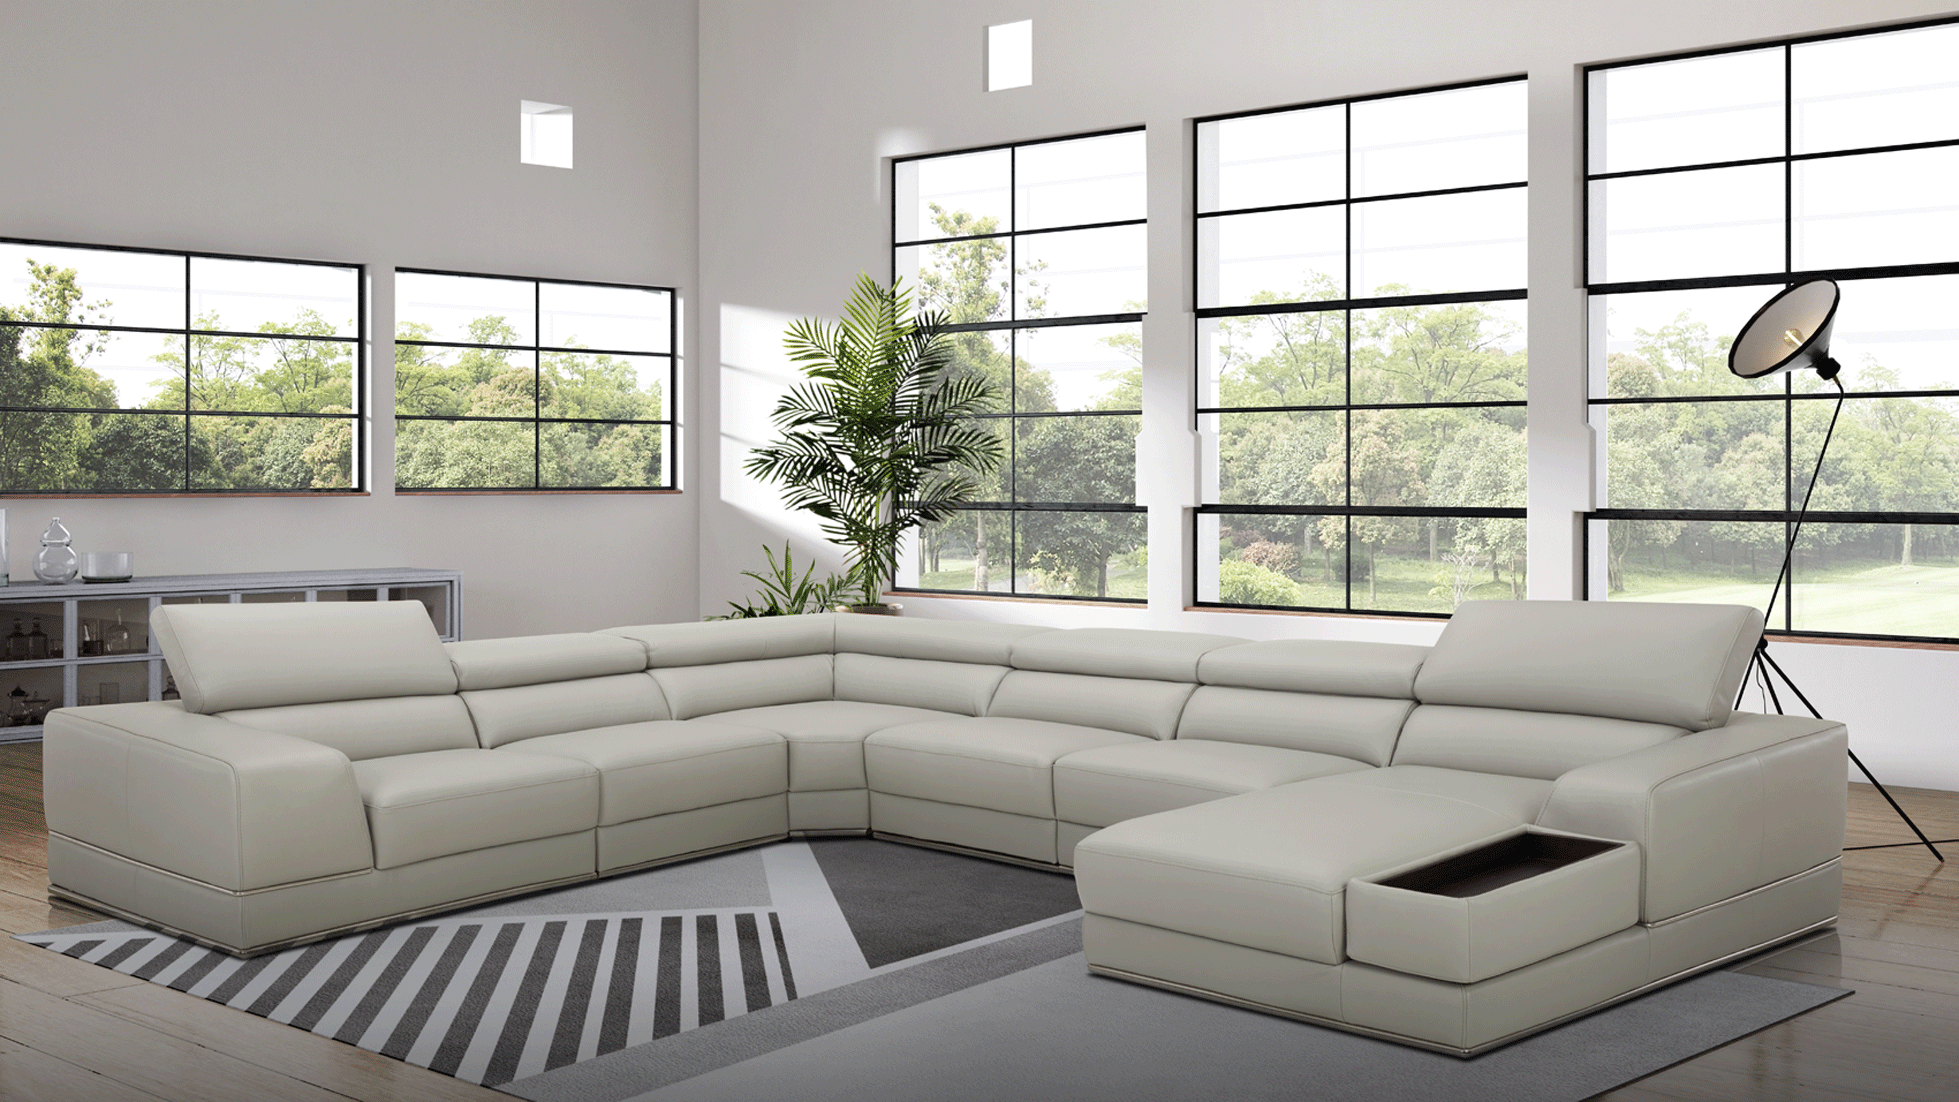 Living Room Furniture Coffee and End Tables 1576 Sectional Right by Kuka